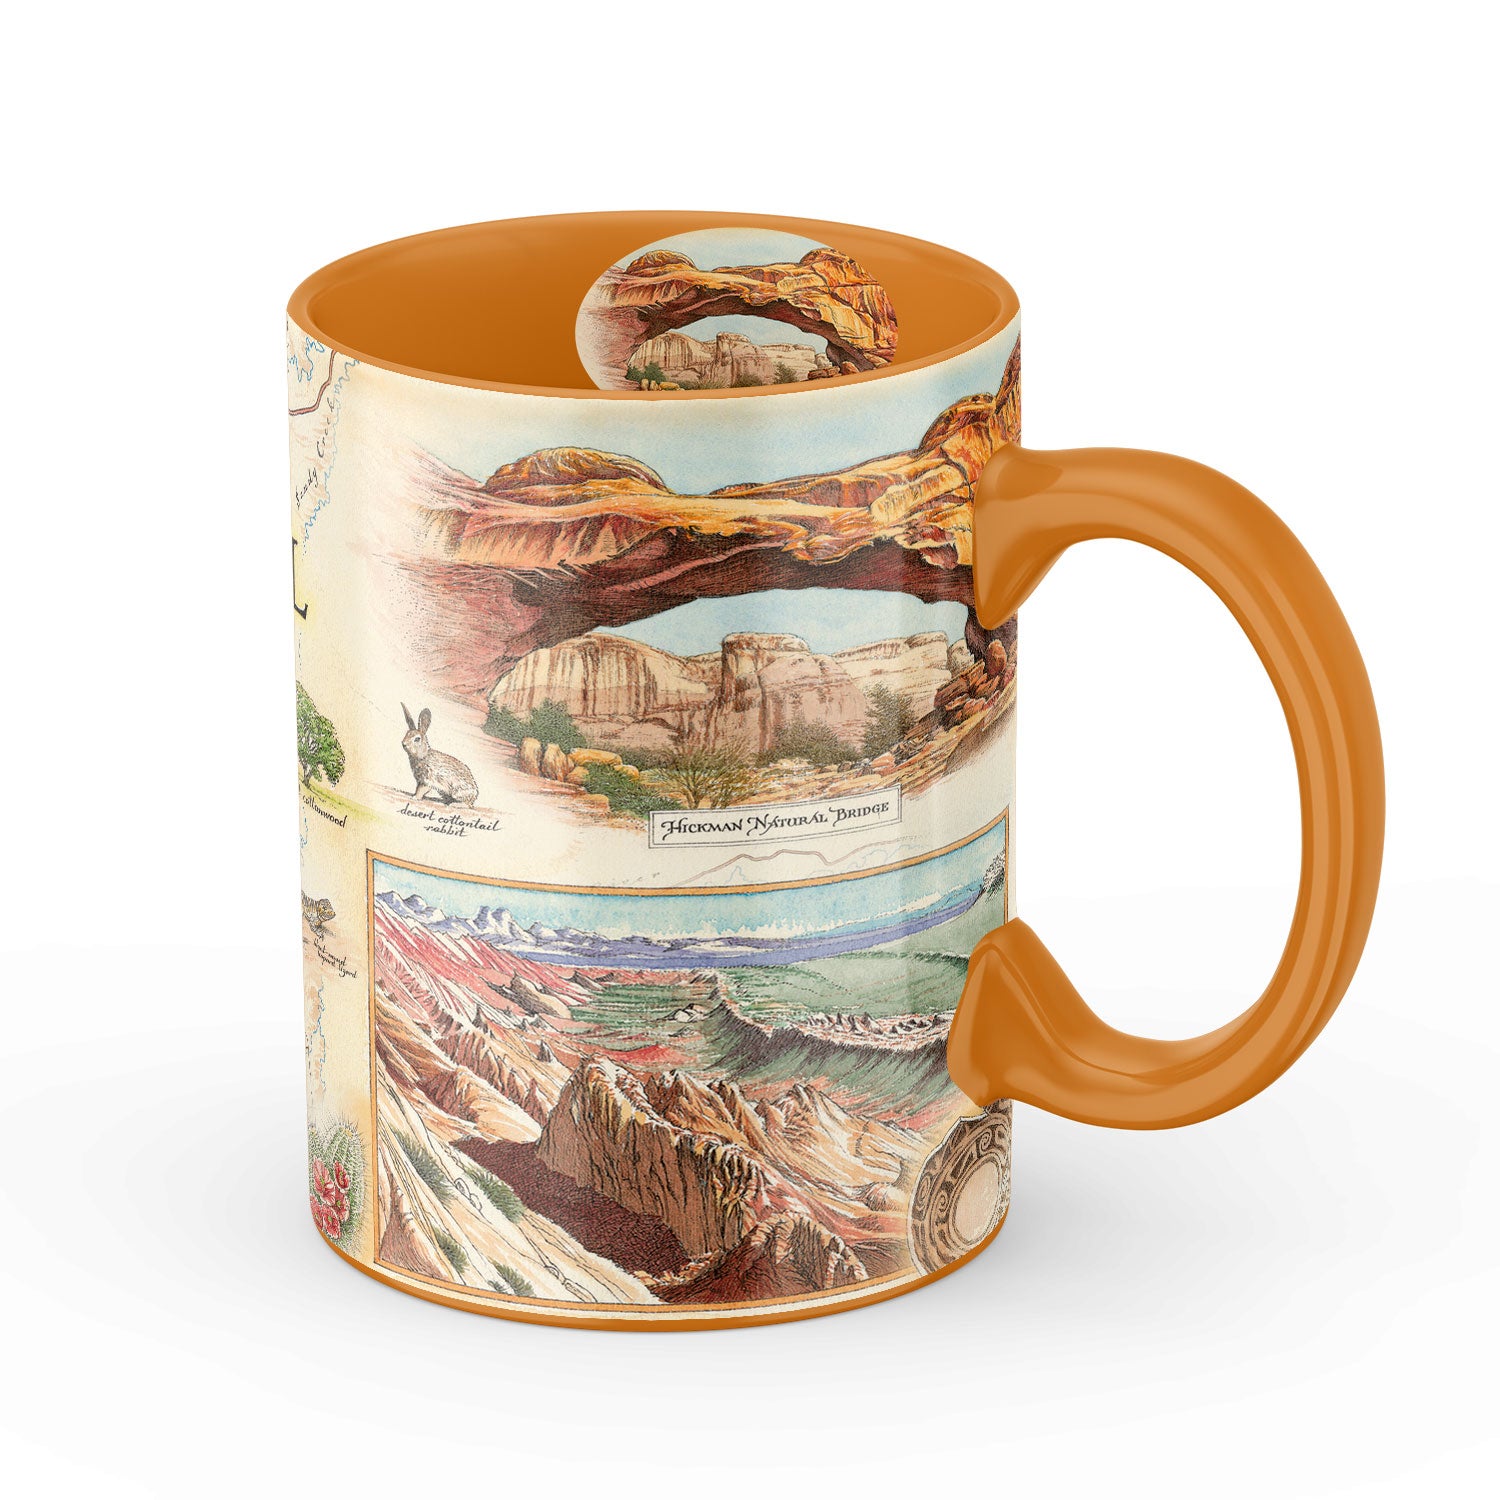 Utah's Capitol Reef National Park Map Ceramic Mug in orange and earth tone colors. Featuring Claret Cup Cactus, Narrowleaf Yucca, Prince's Plume, and the Two-Needle Pinyon Pine. Detailed depictions of landmarks and geographic wonders like the Lower Muley Twist Canyon, Capitol Gorge, and Hickman Natural Bridge.